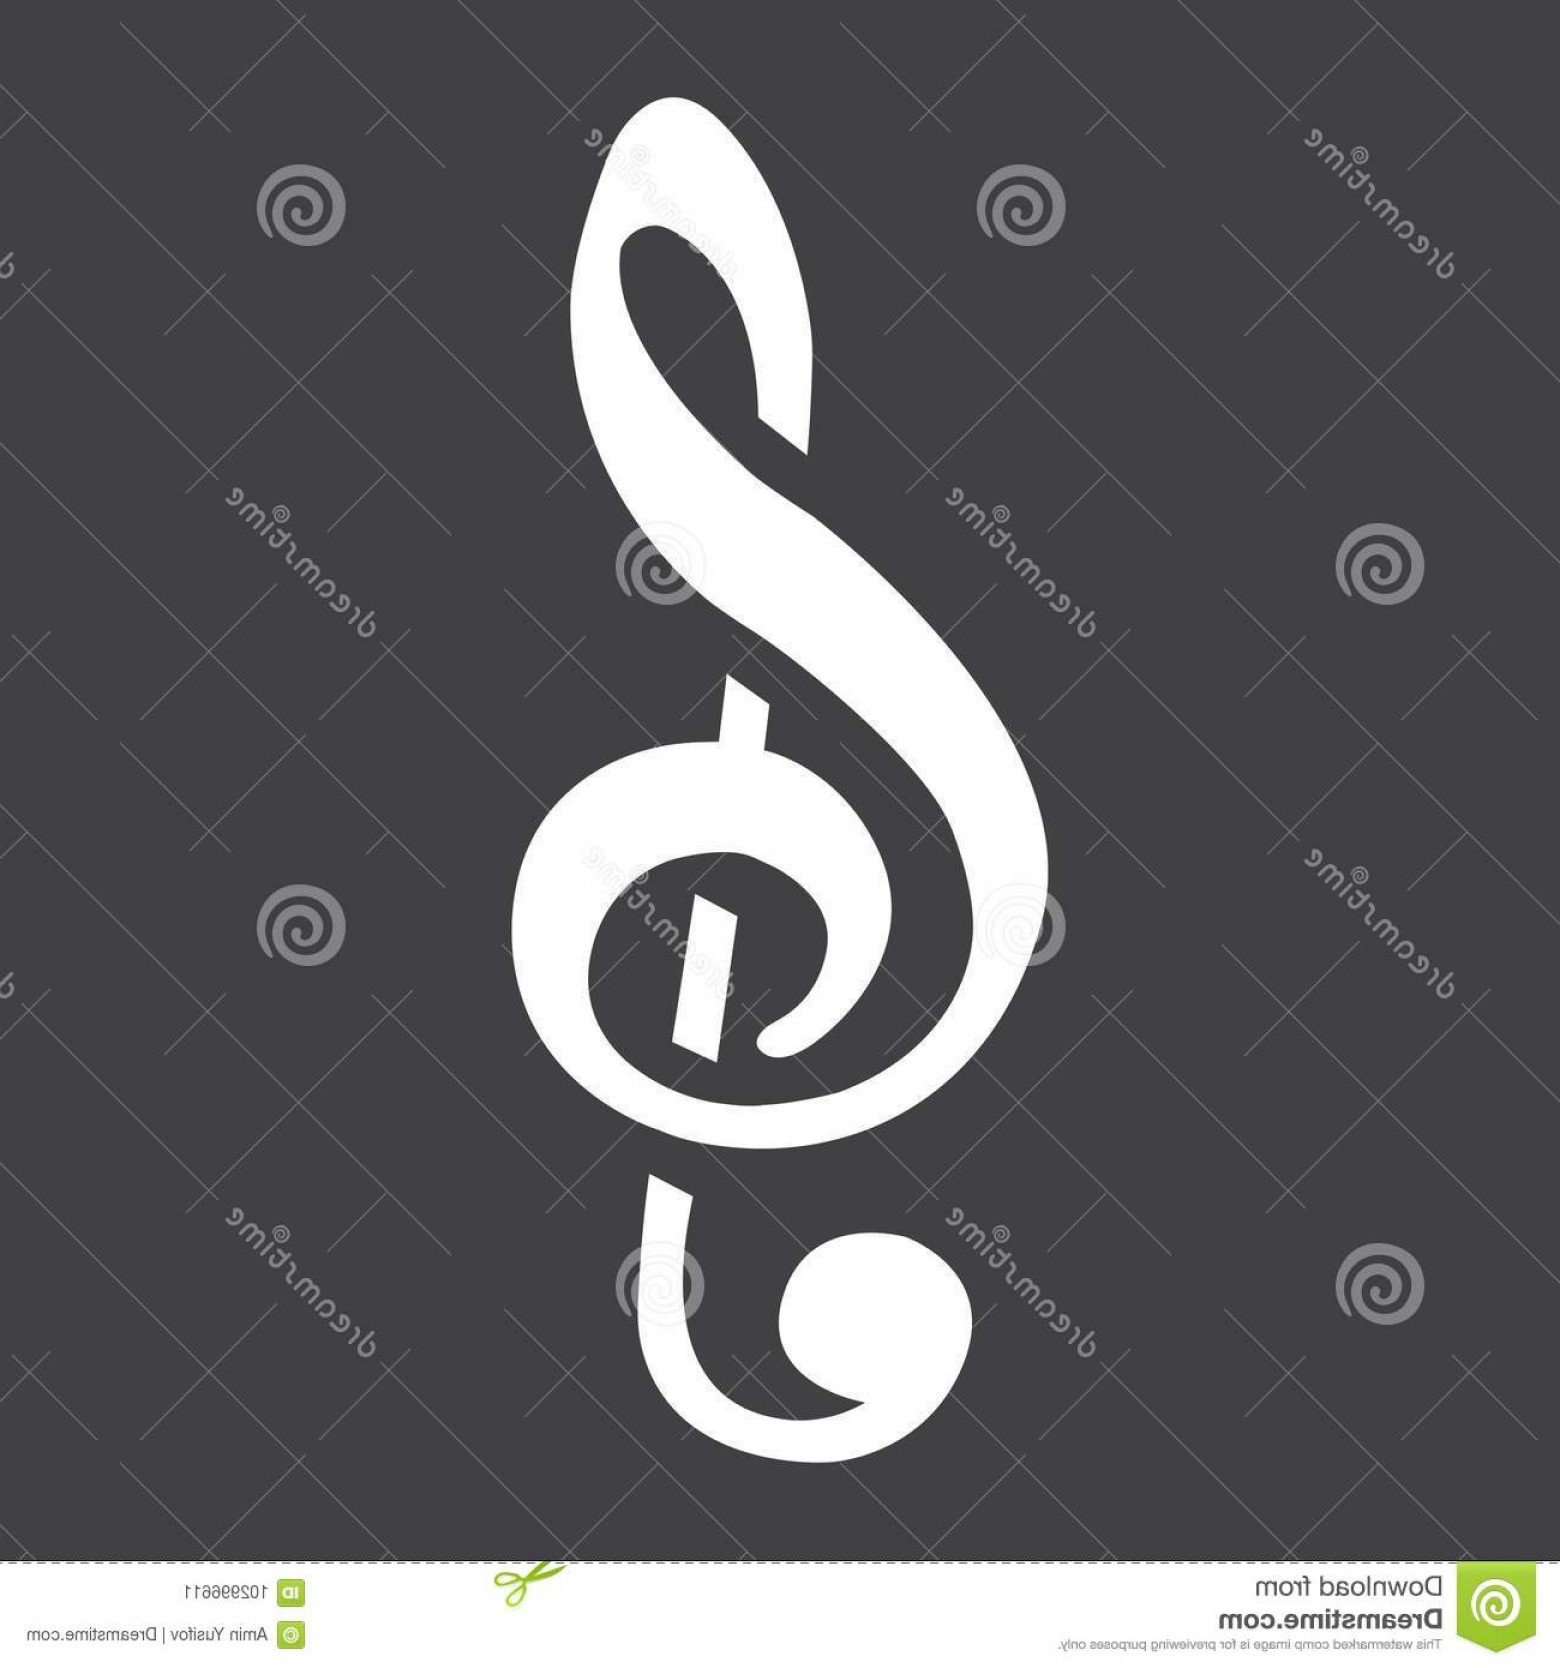 treble-clef-vector-at-getdrawings-free-download